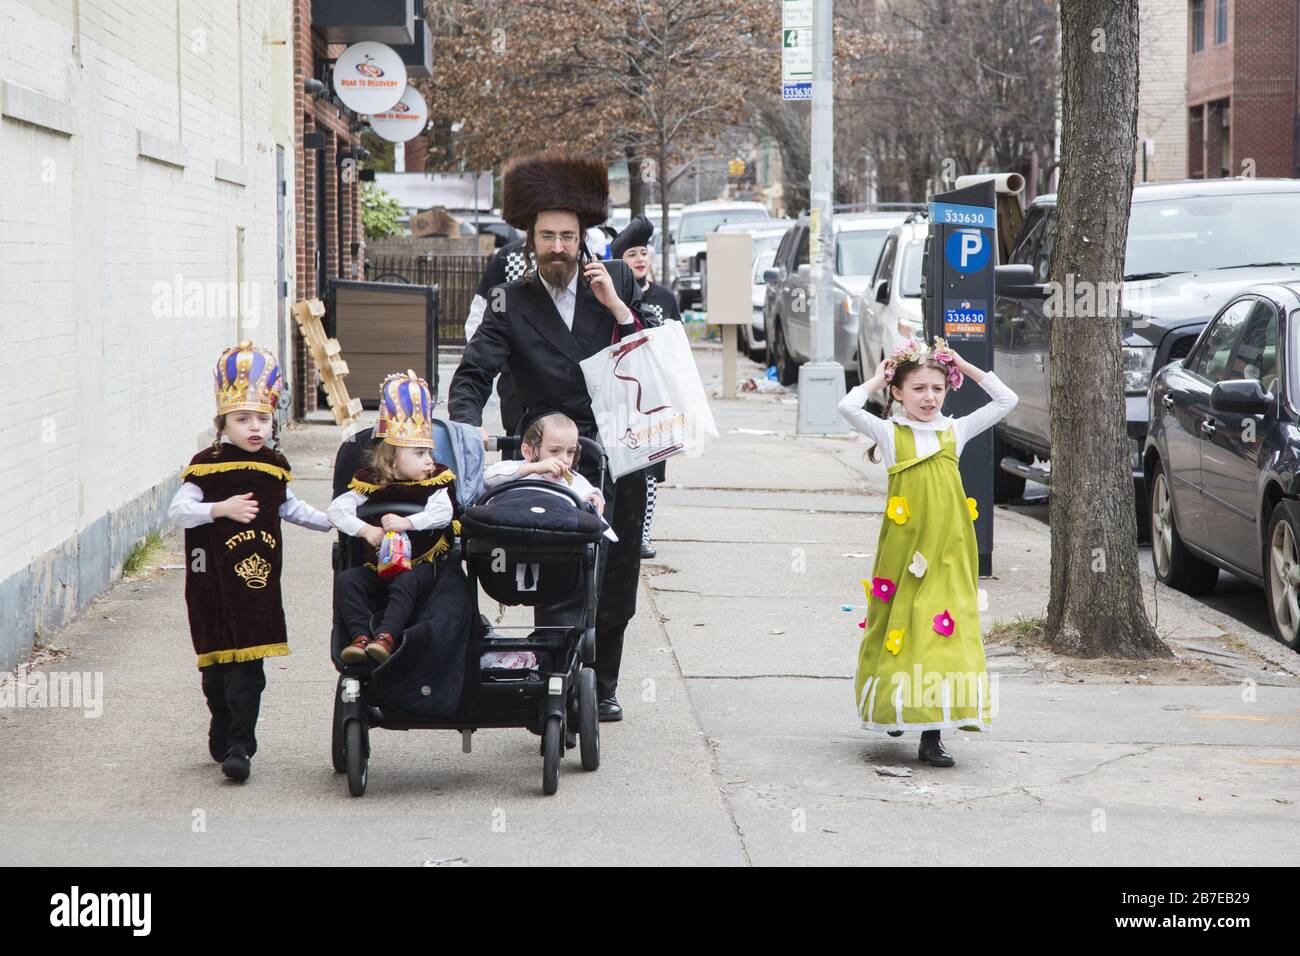 The orthodox Jewish community in Borough Park Brooklyn celebrates the festive holiday of Purim by wearing costumes, donating to the poor, eating tasty foods and generally having a good time. People on 13th Avenue. Purim is celebrated every year on the 14th of the Hebrew month of Adar . It commemorates the salvation of the Jewish people in the ancient Persian empire from Haman’s plot “to destroy, kill and annihilate all the Jews, young and old, infants and women, in a single day,” as recorded in the Megillah (book of Esther). Stock Photo